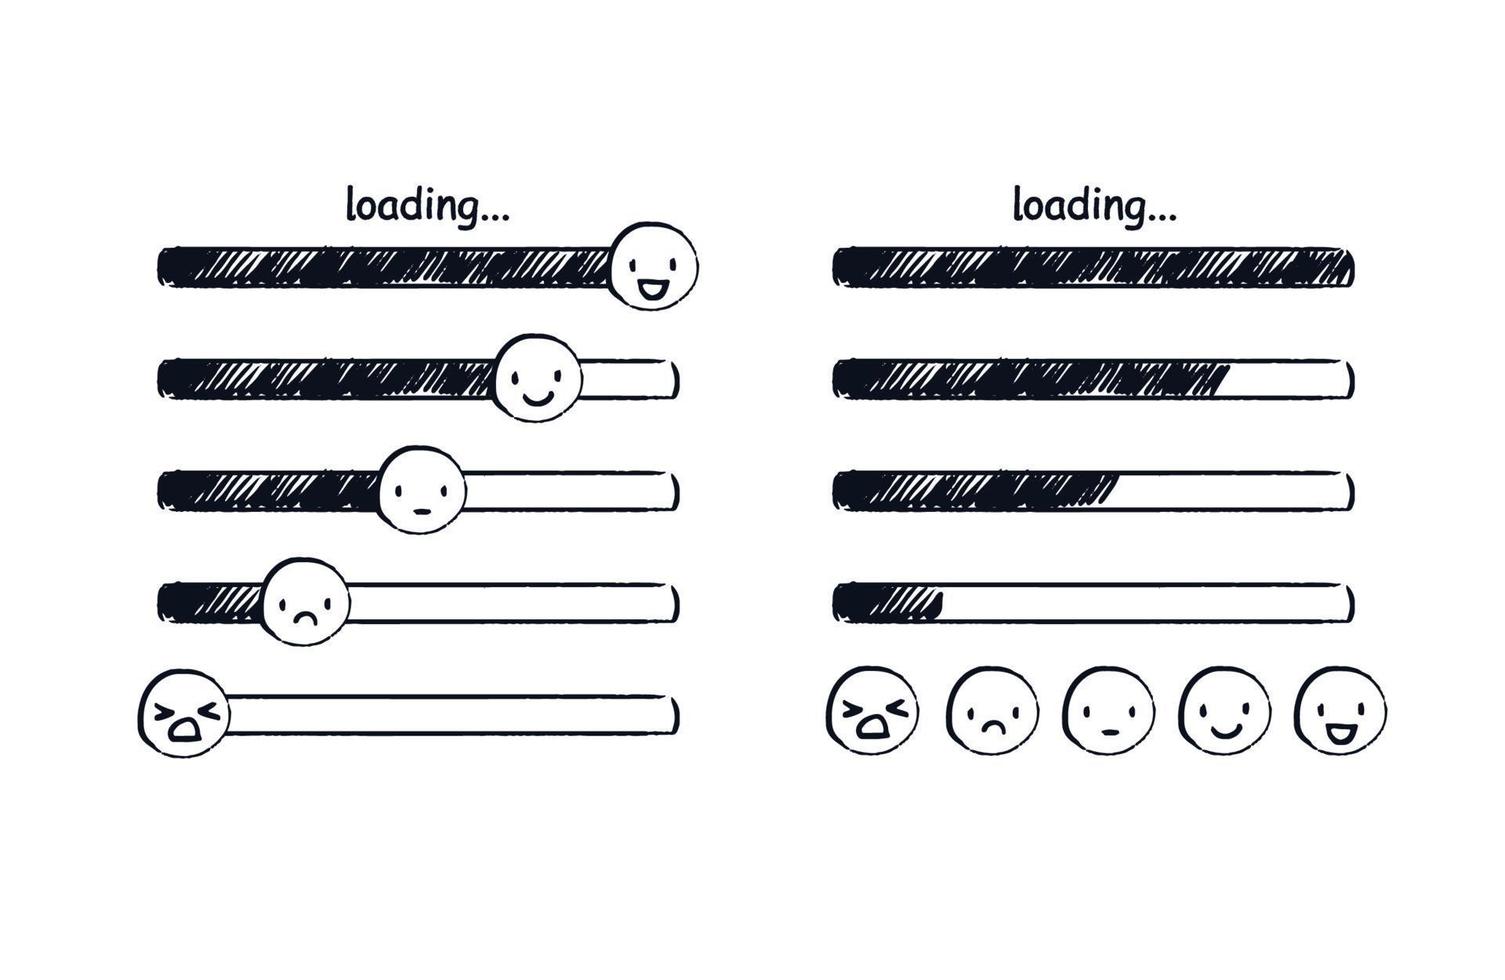 Loading bar emoji. Doodle mood indicator or hand-drawn emoticons ranging from sad to happy. Vector sketch illustration of different levels of loading a web page.